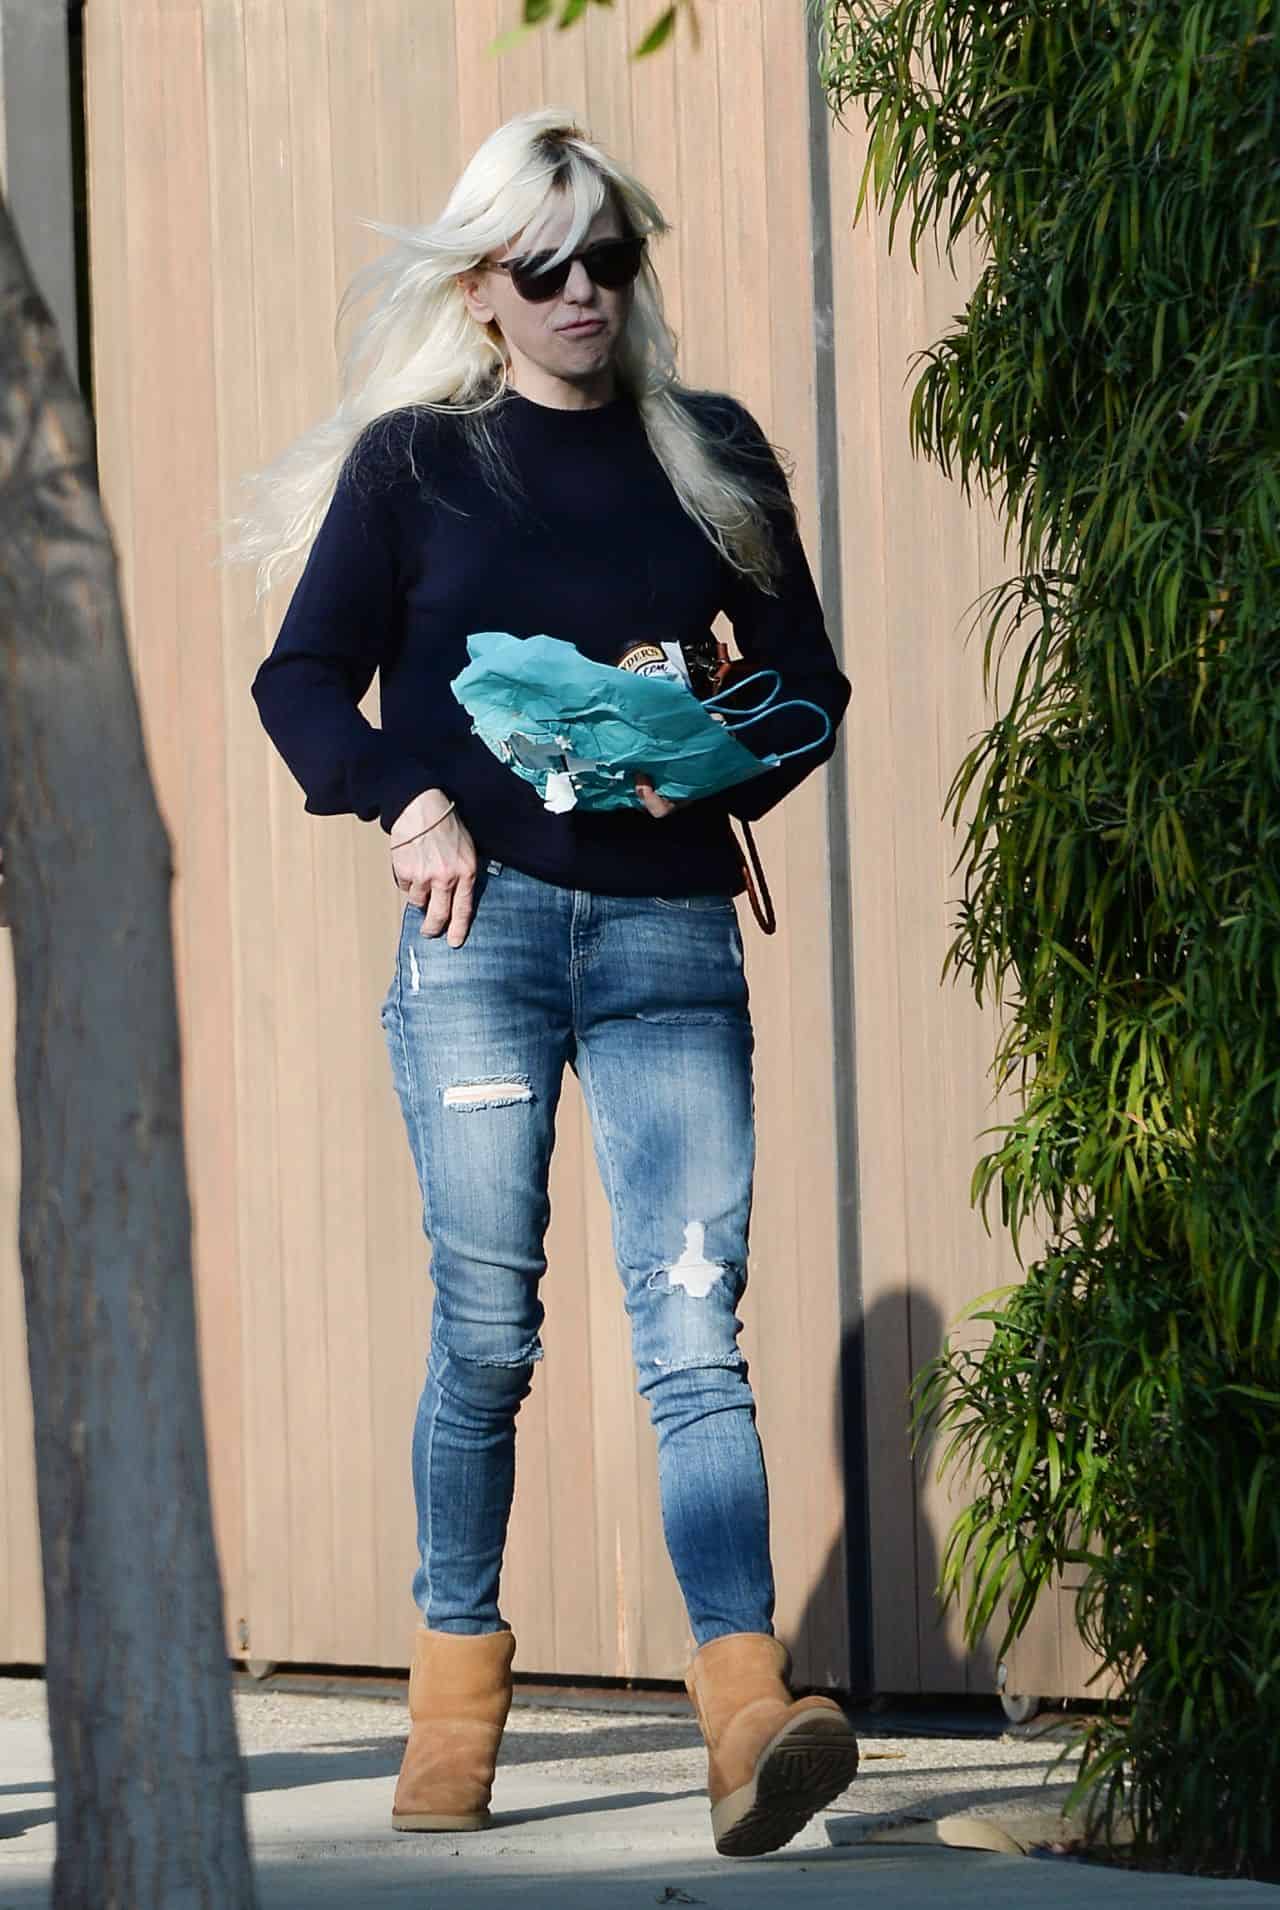 Anna Faris Enjoyed Some Snacks as she was Running Errands in Los Angeles